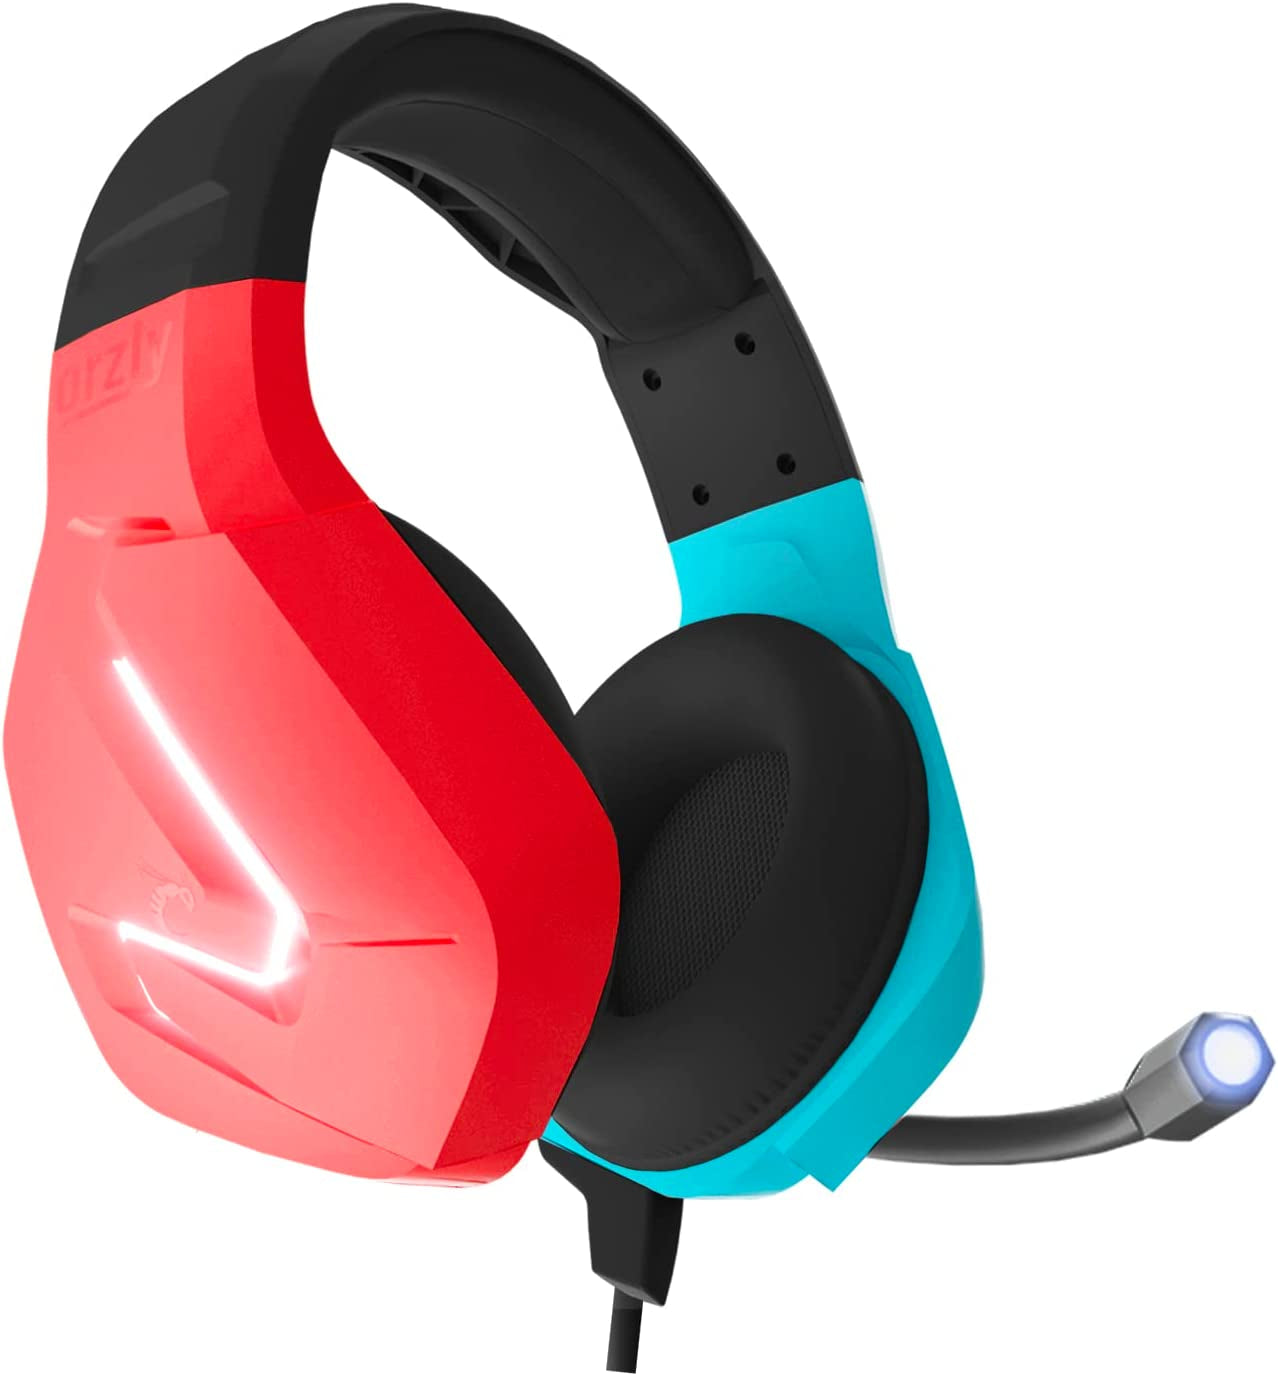 Professional Gaming Headset with Mic - Compatible with Nintendo Switch OLED and Lite Joycon - LED Light, Microphone, and Remote Included